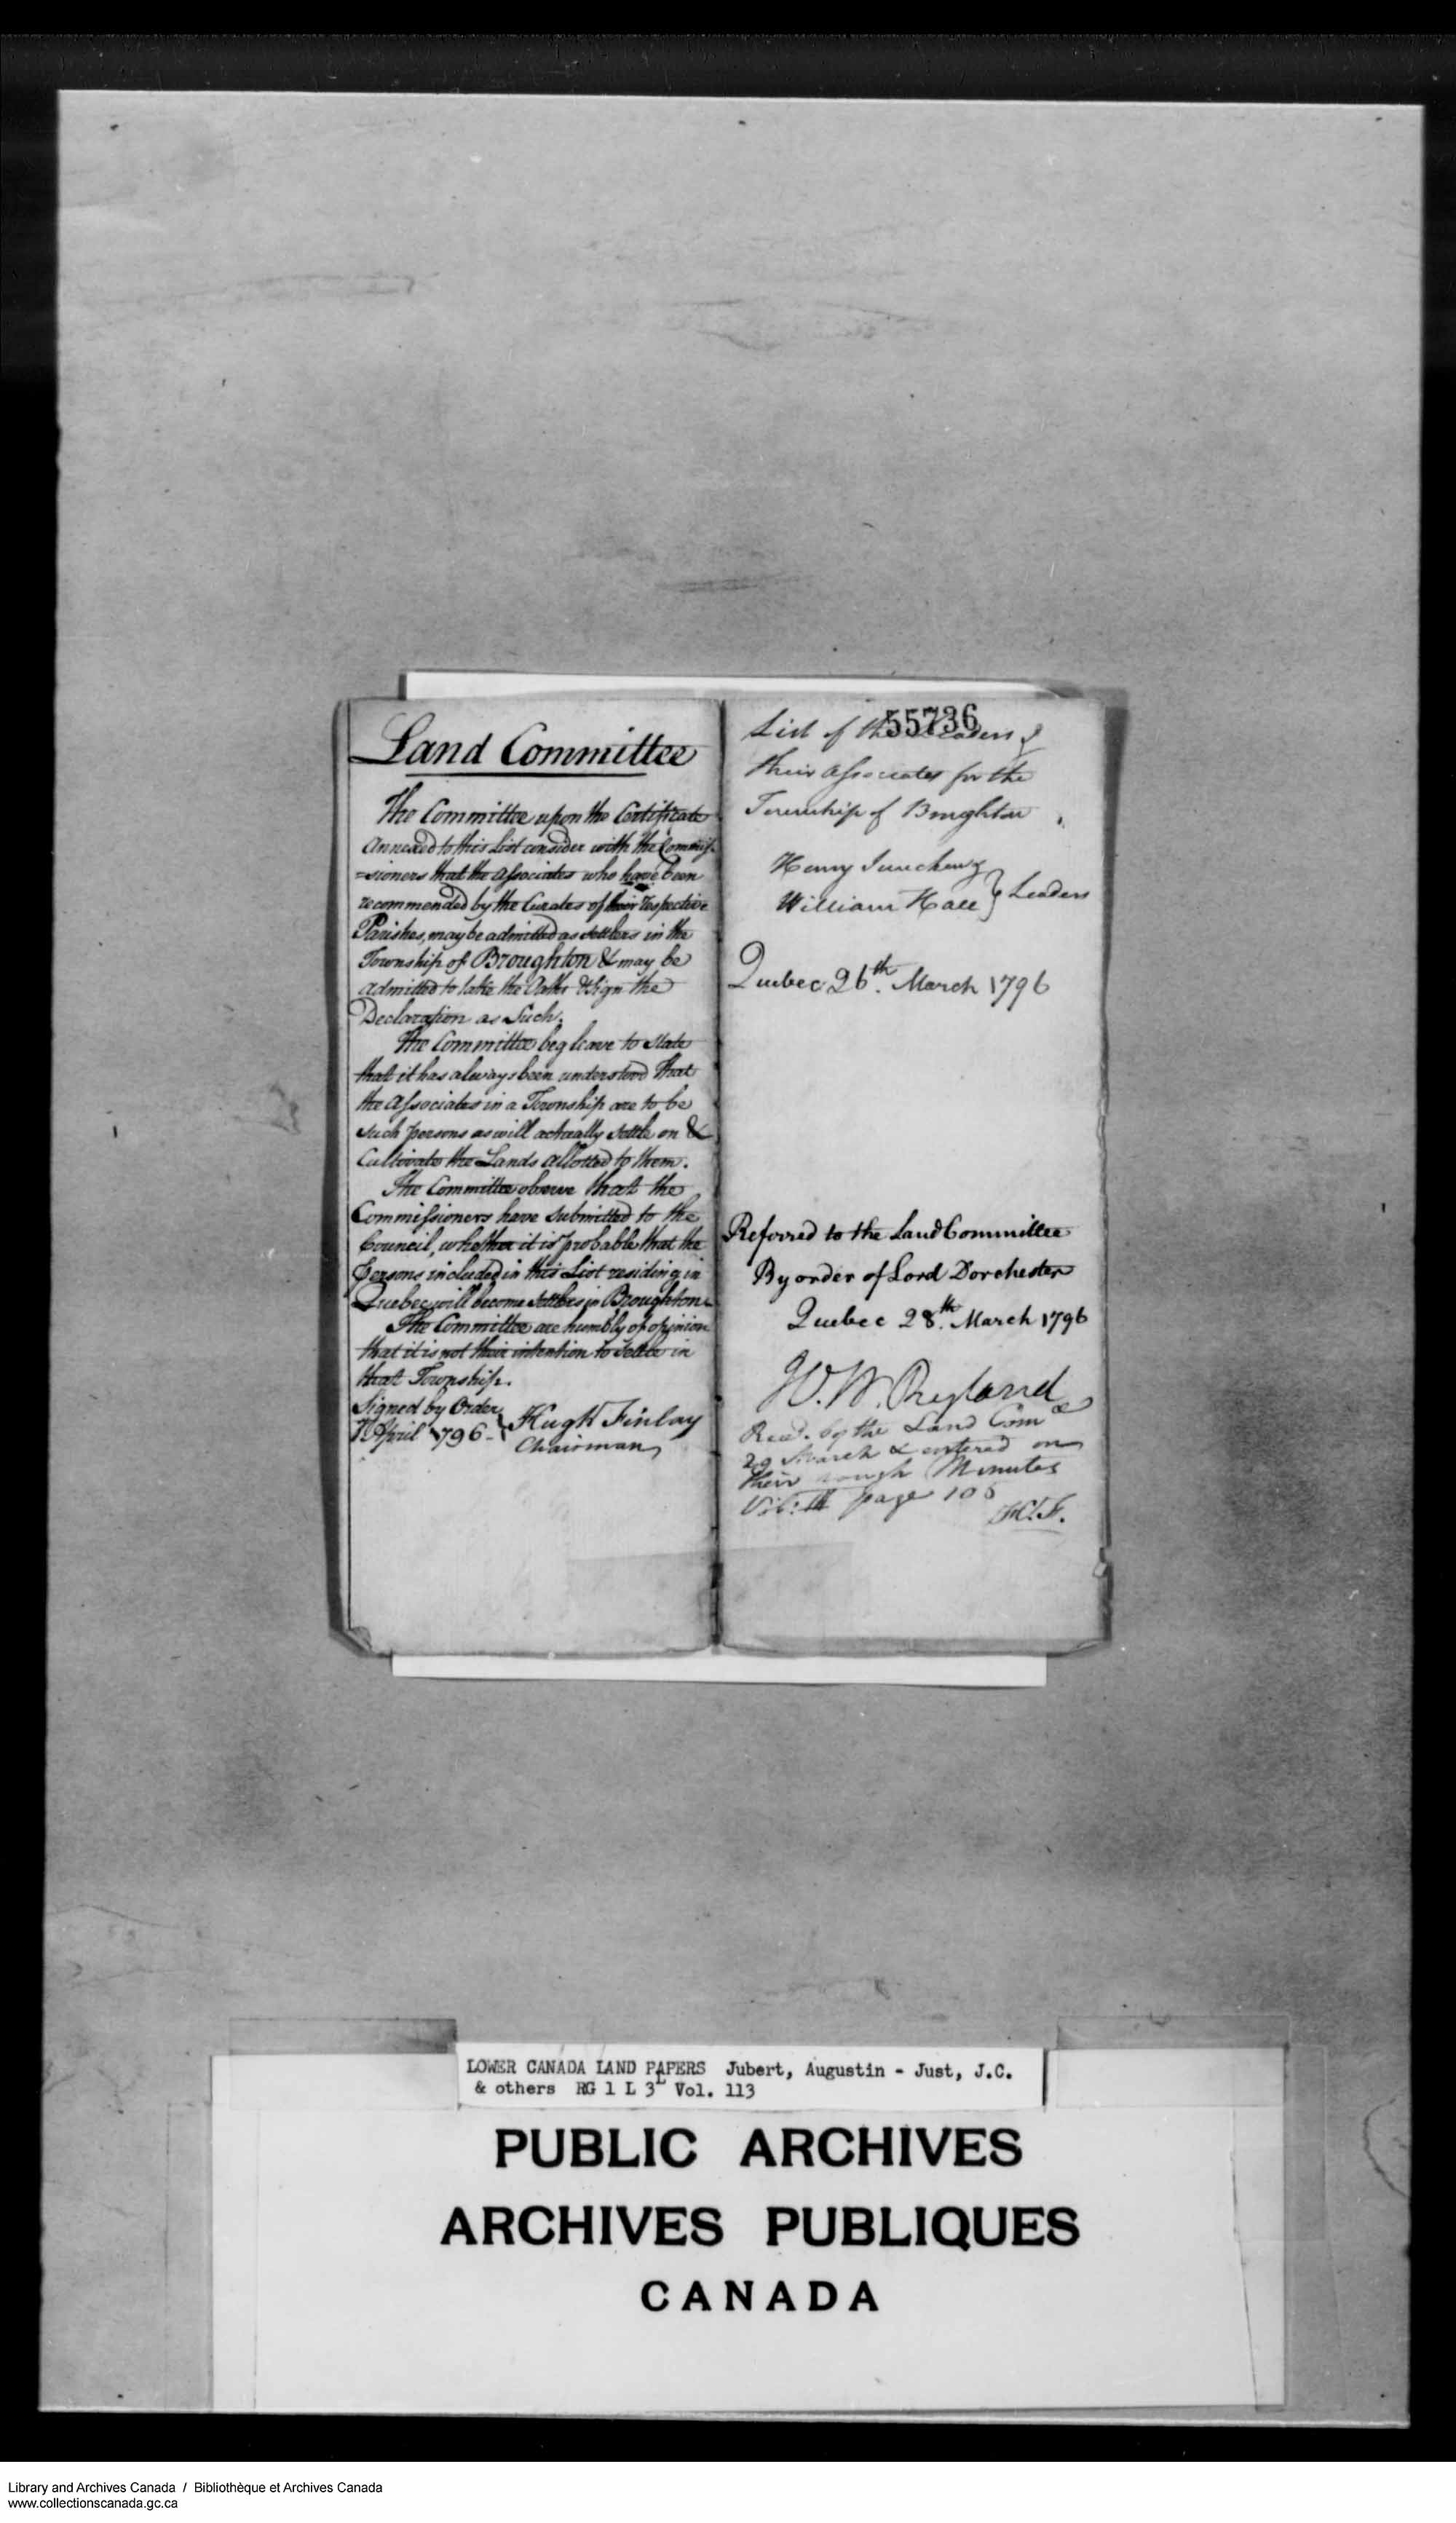 Digitized page of  for Image No.: e008700224